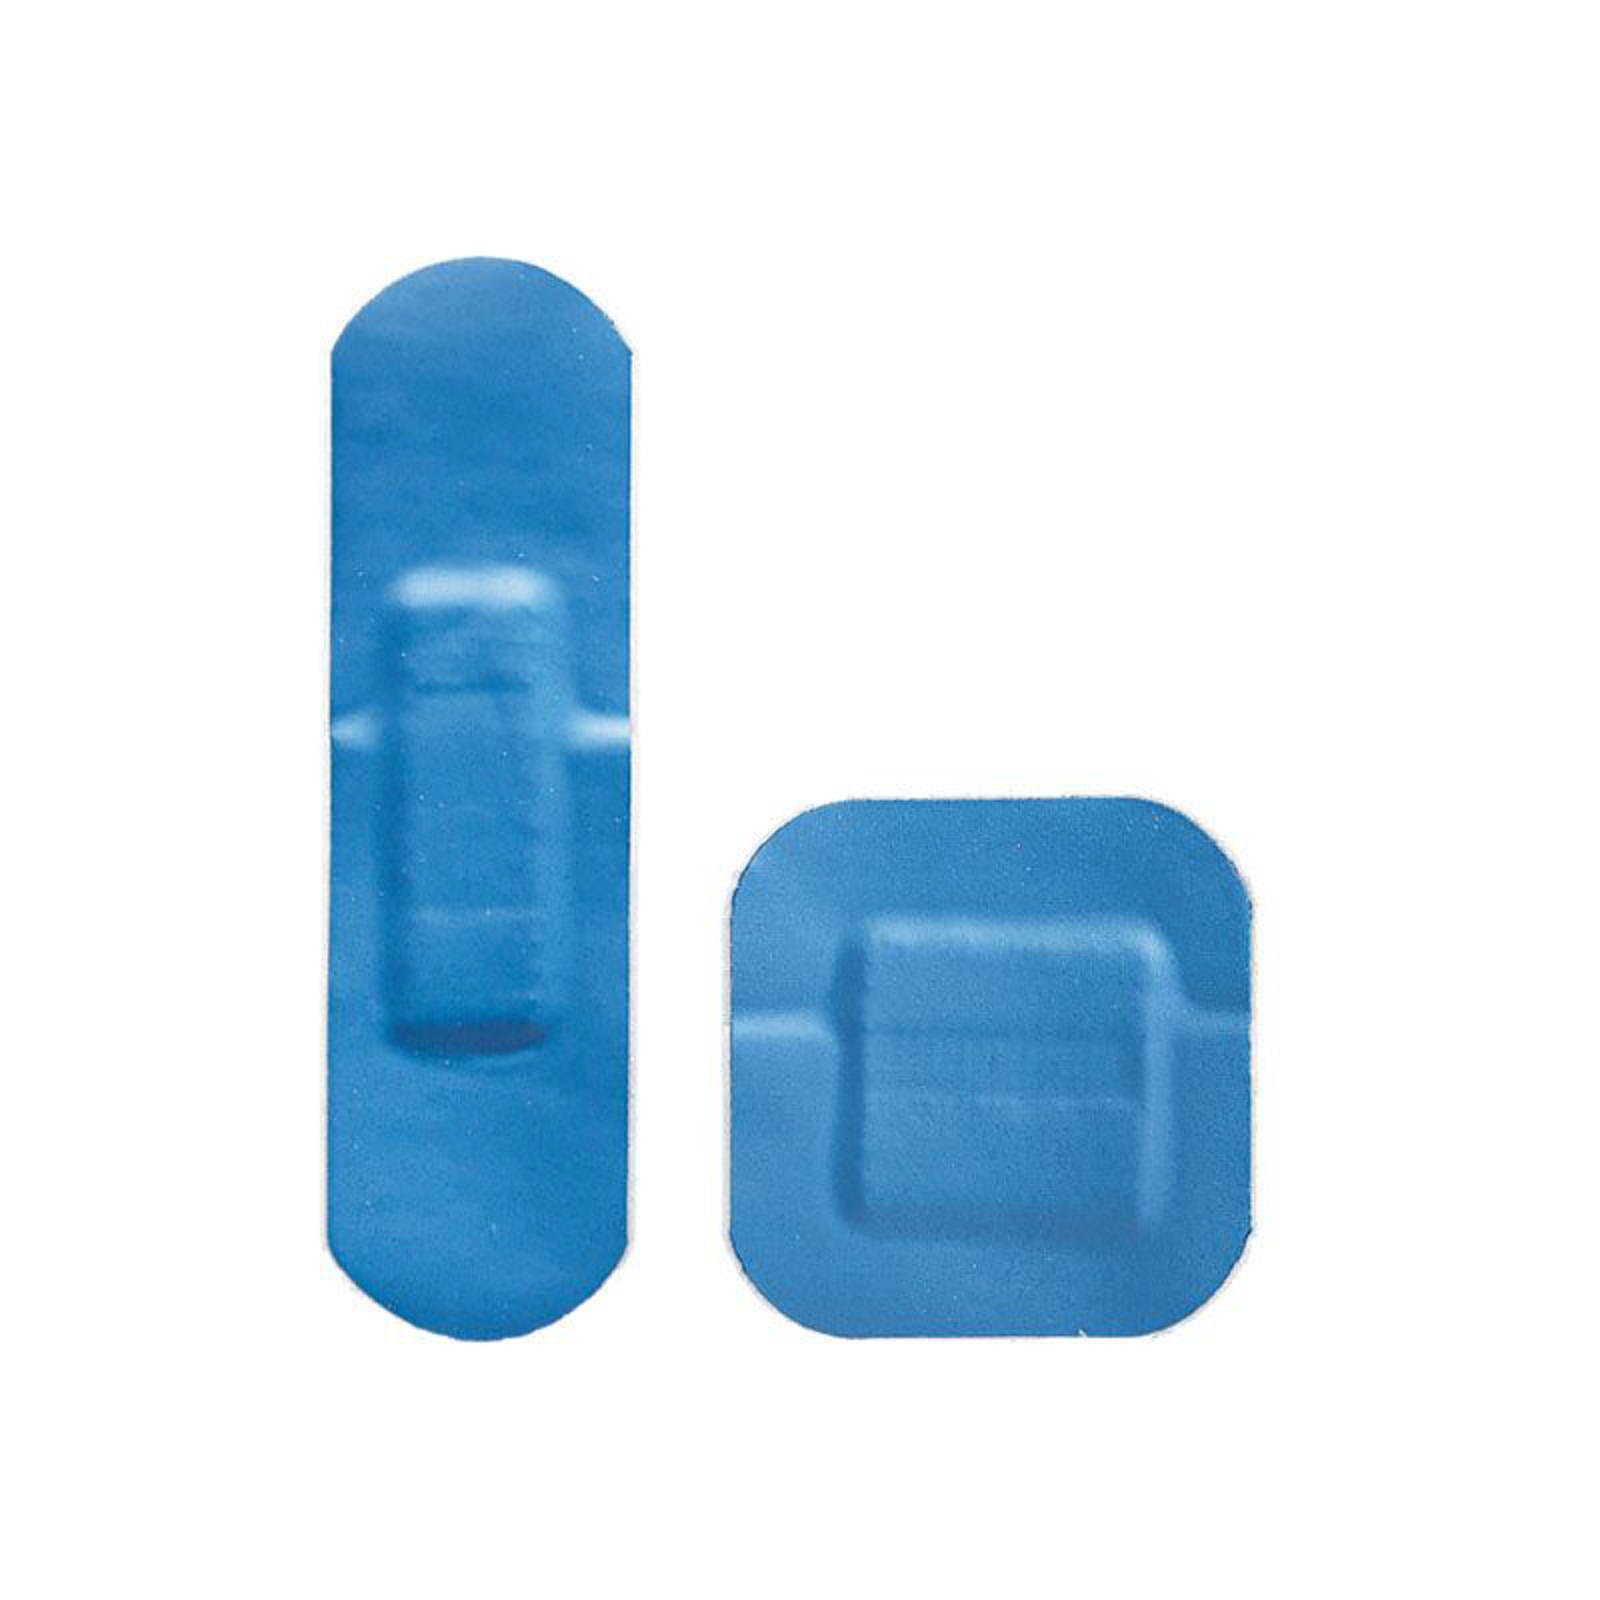 X-Ray Detectable Plasters - Pack of 20: 38 x 38mm and 72 x 22mm